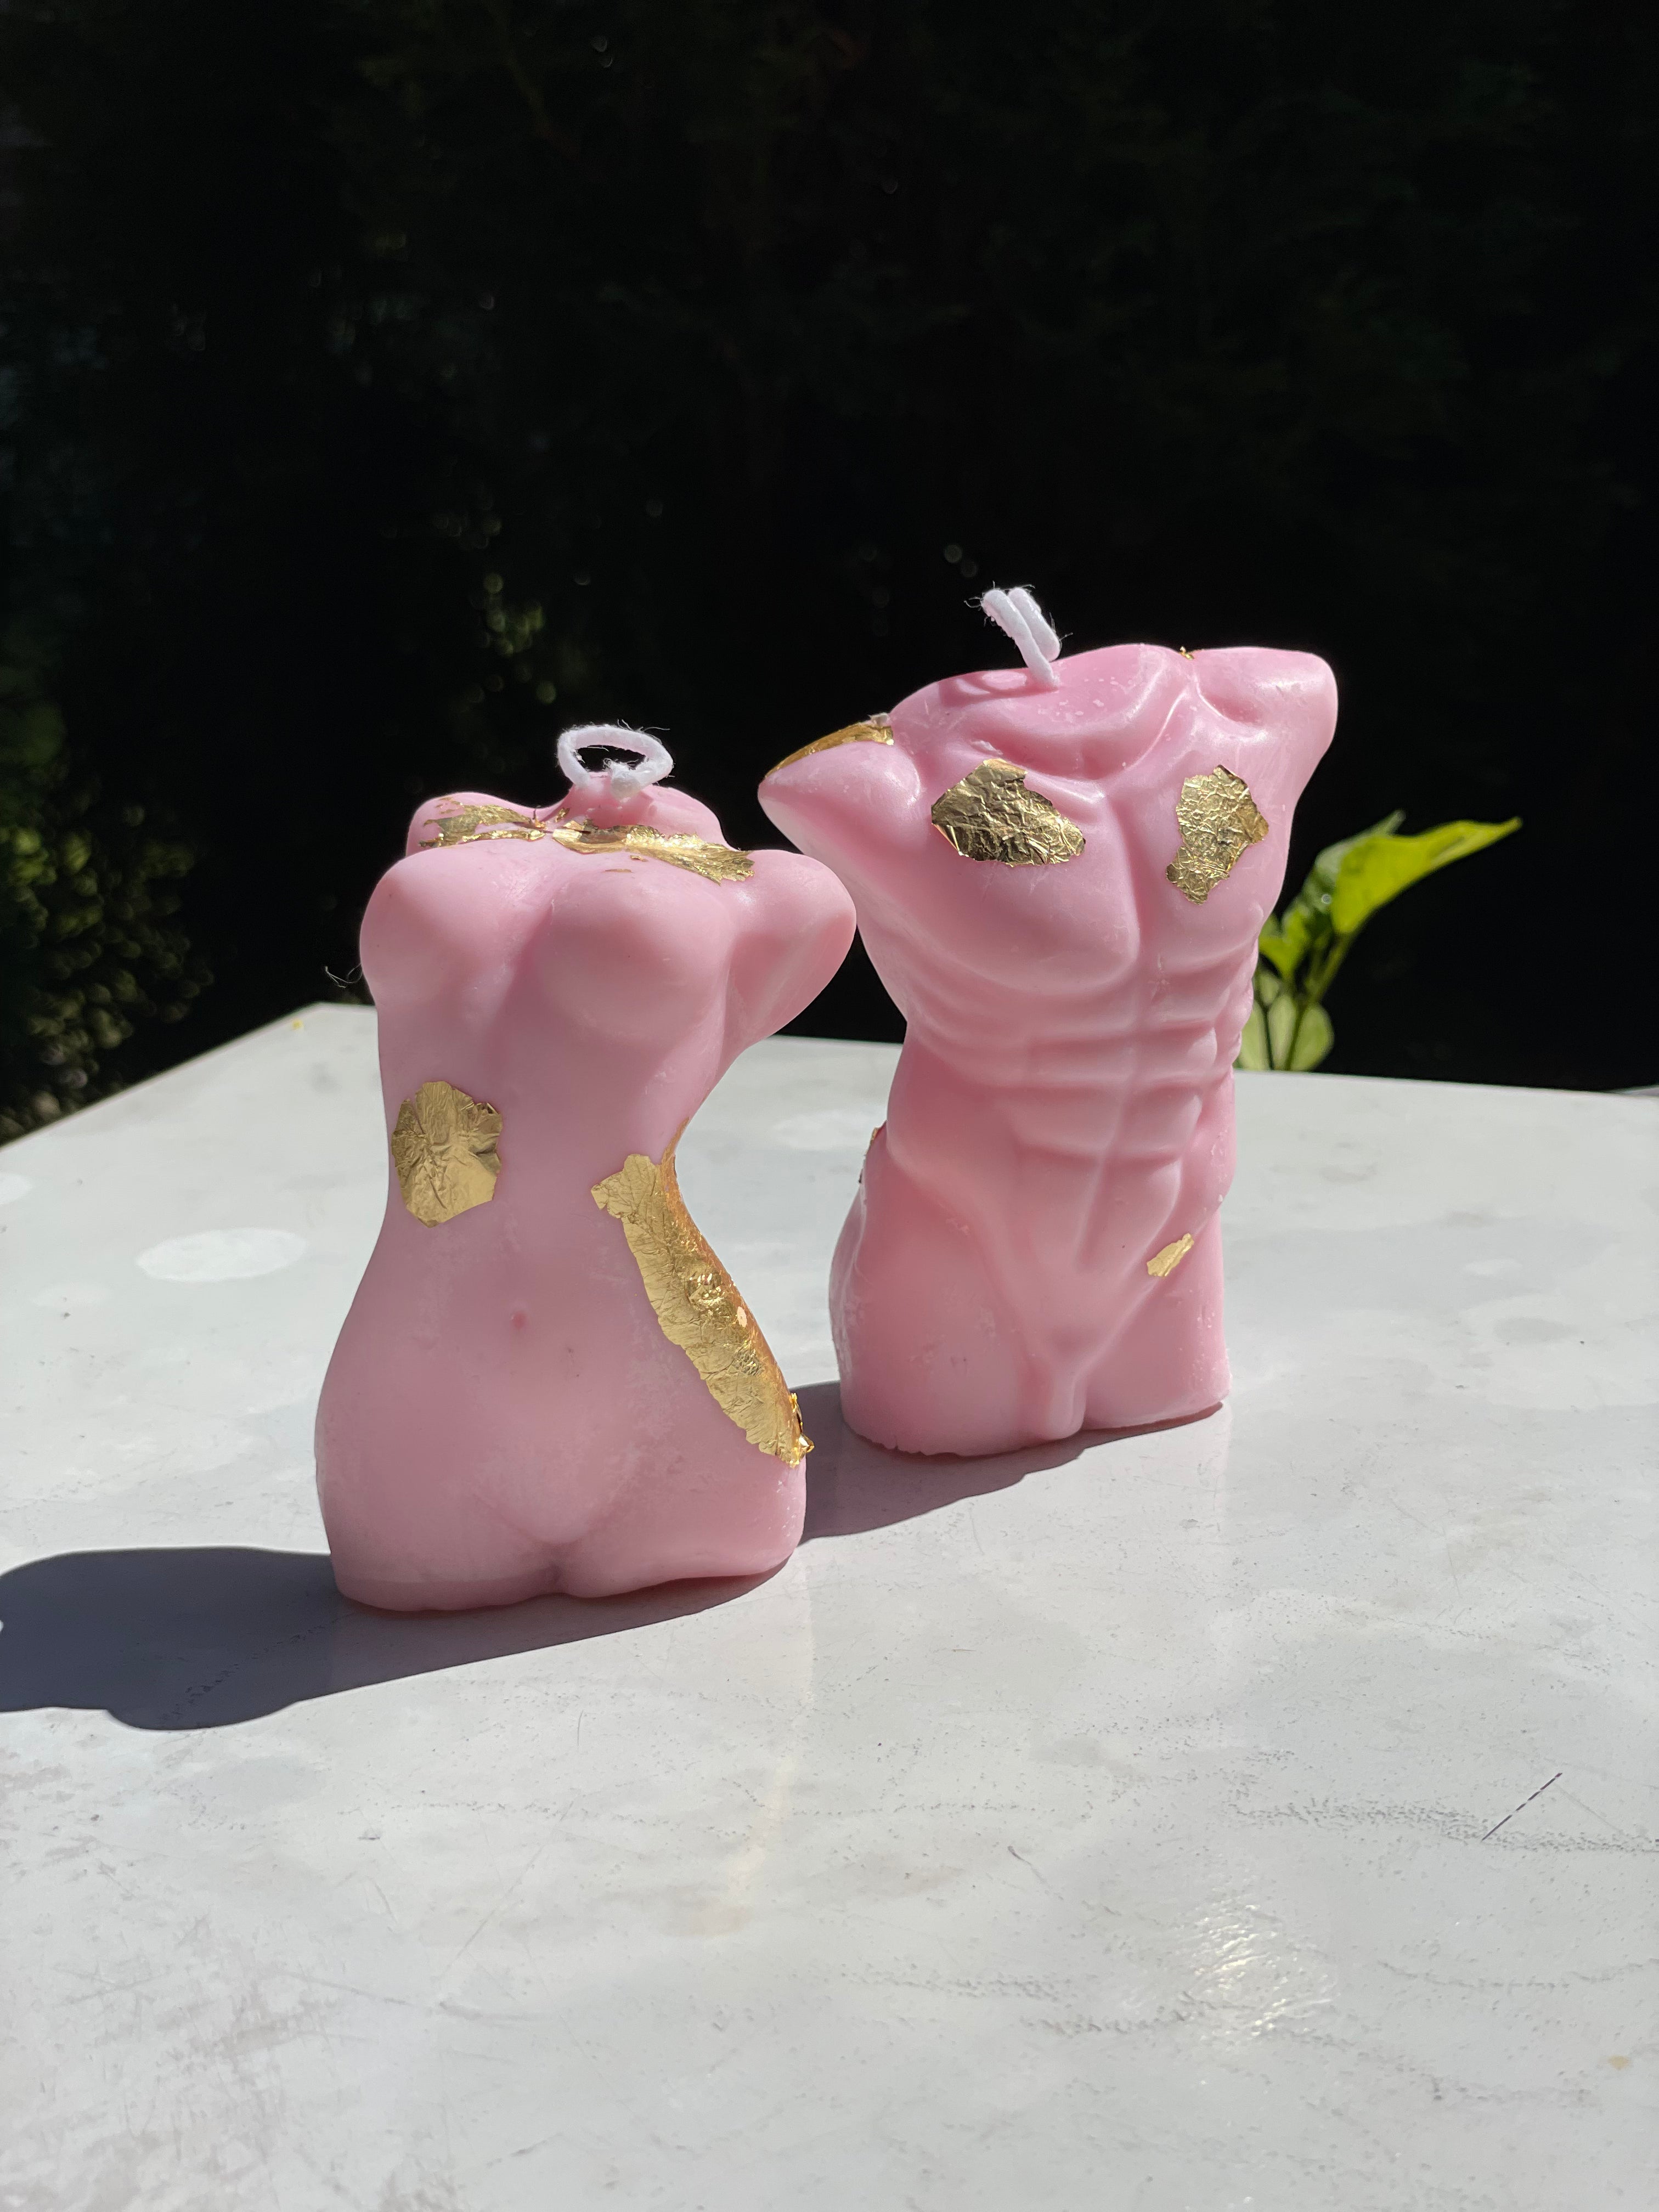 Candles "Male And Female Body" Scented Japanese Cherry